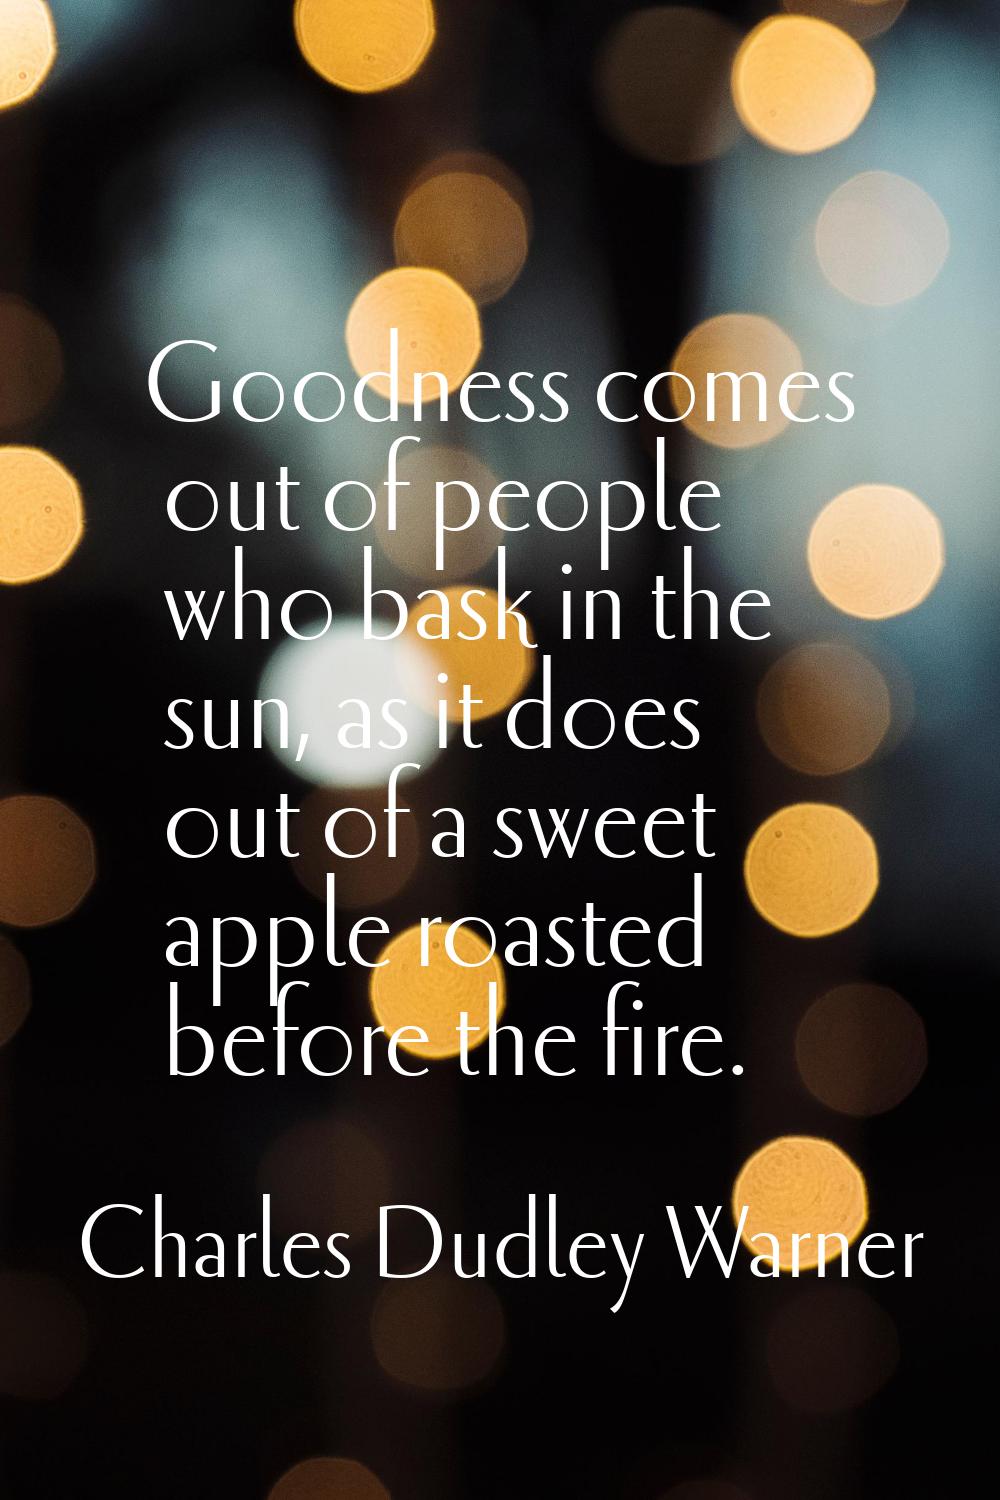 Goodness comes out of people who bask in the sun, as it does out of a sweet apple roasted before th